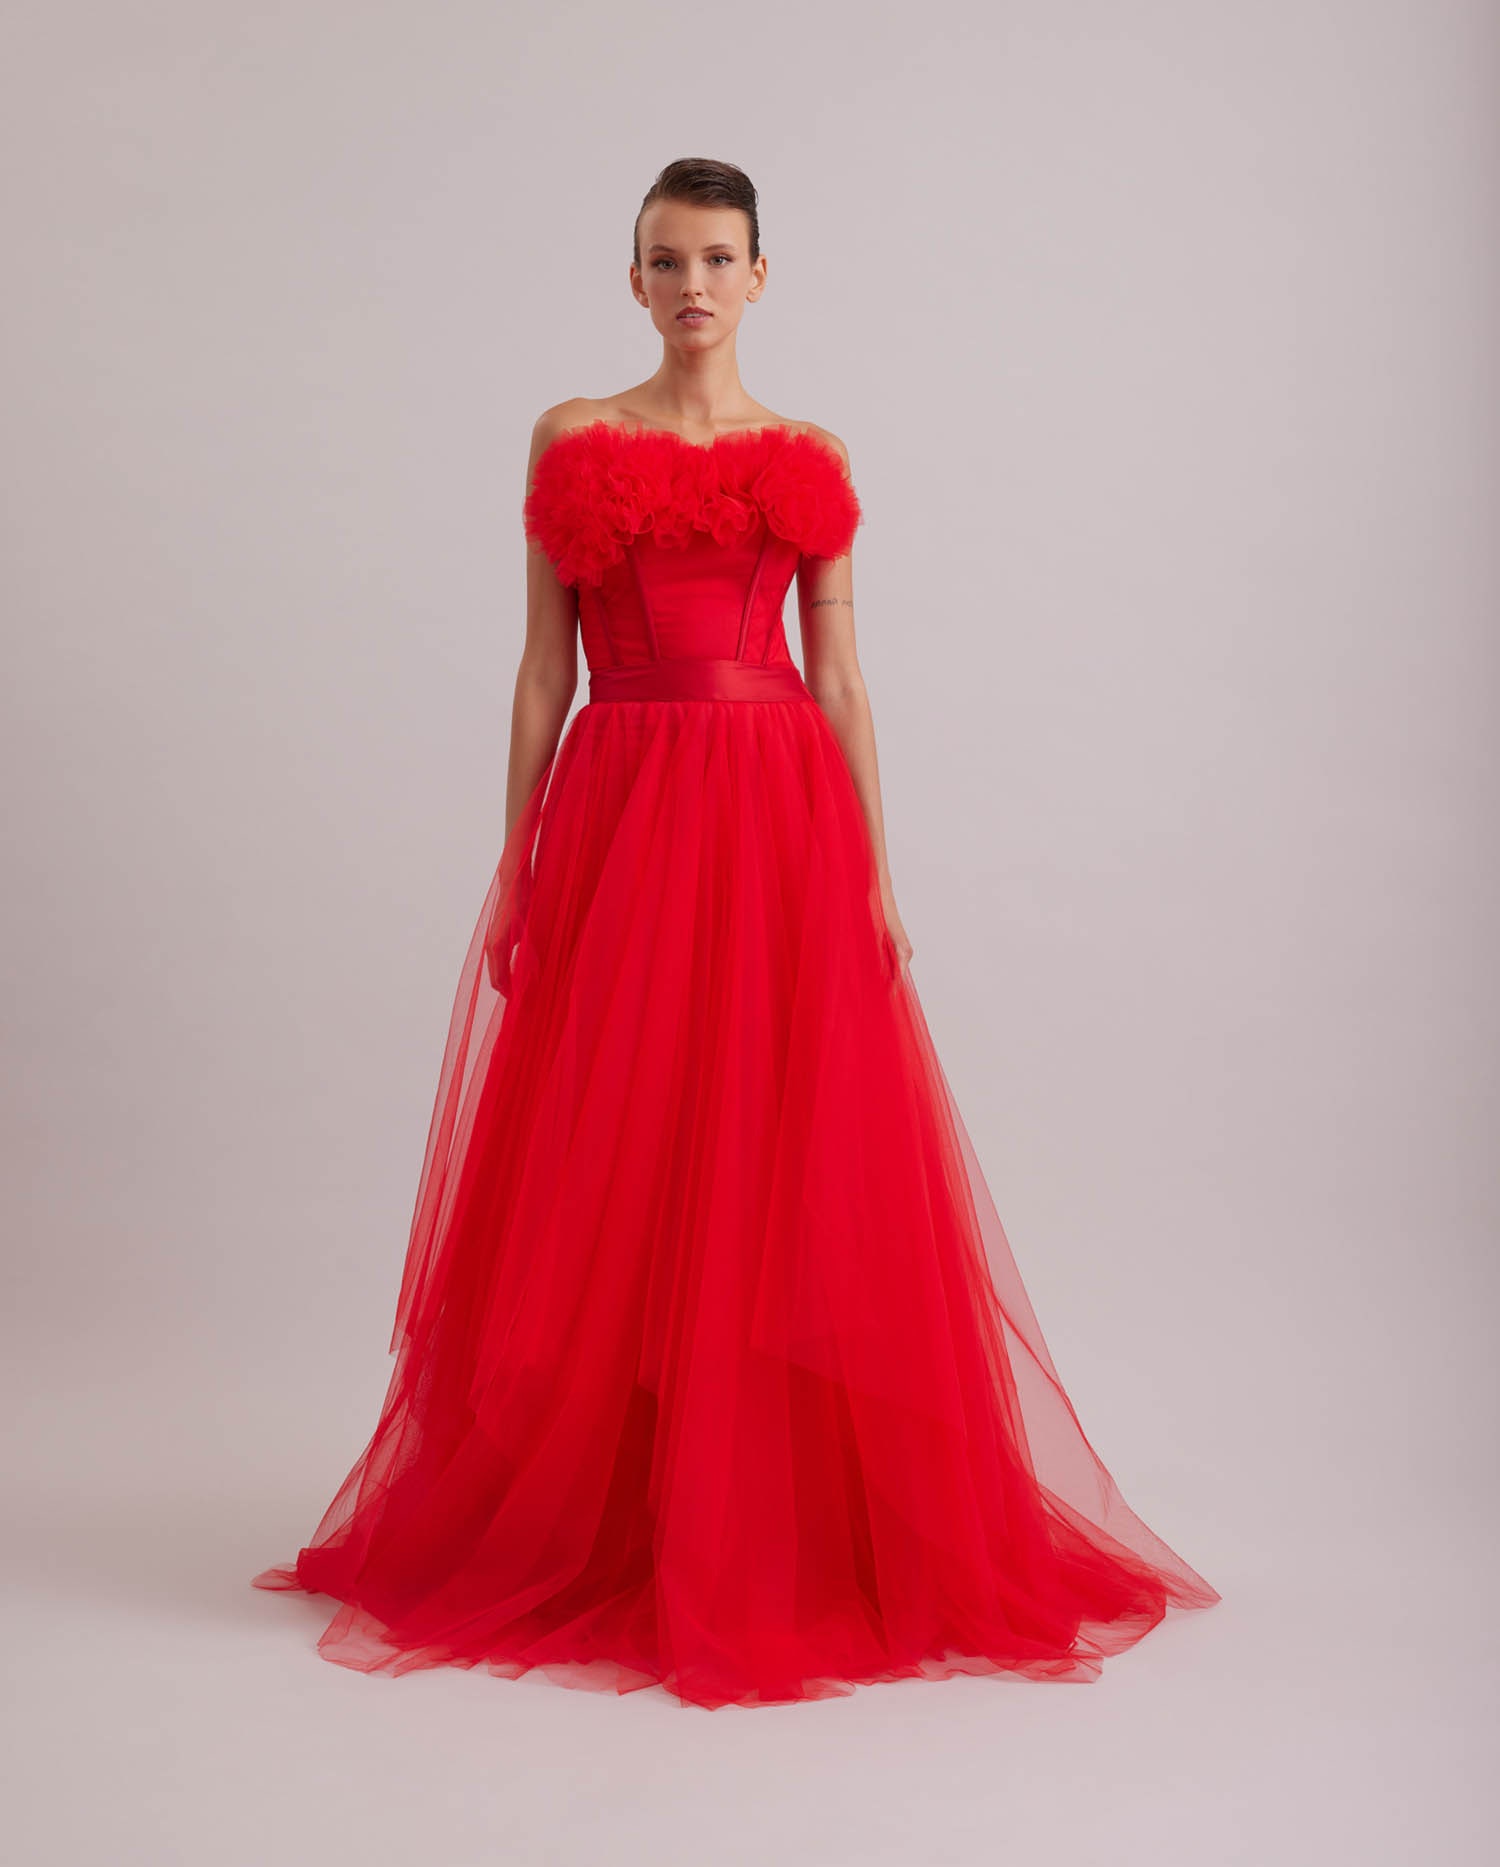 Discover the SIECLE Long strapless satin and tulle dress from ANNE FONTAINE